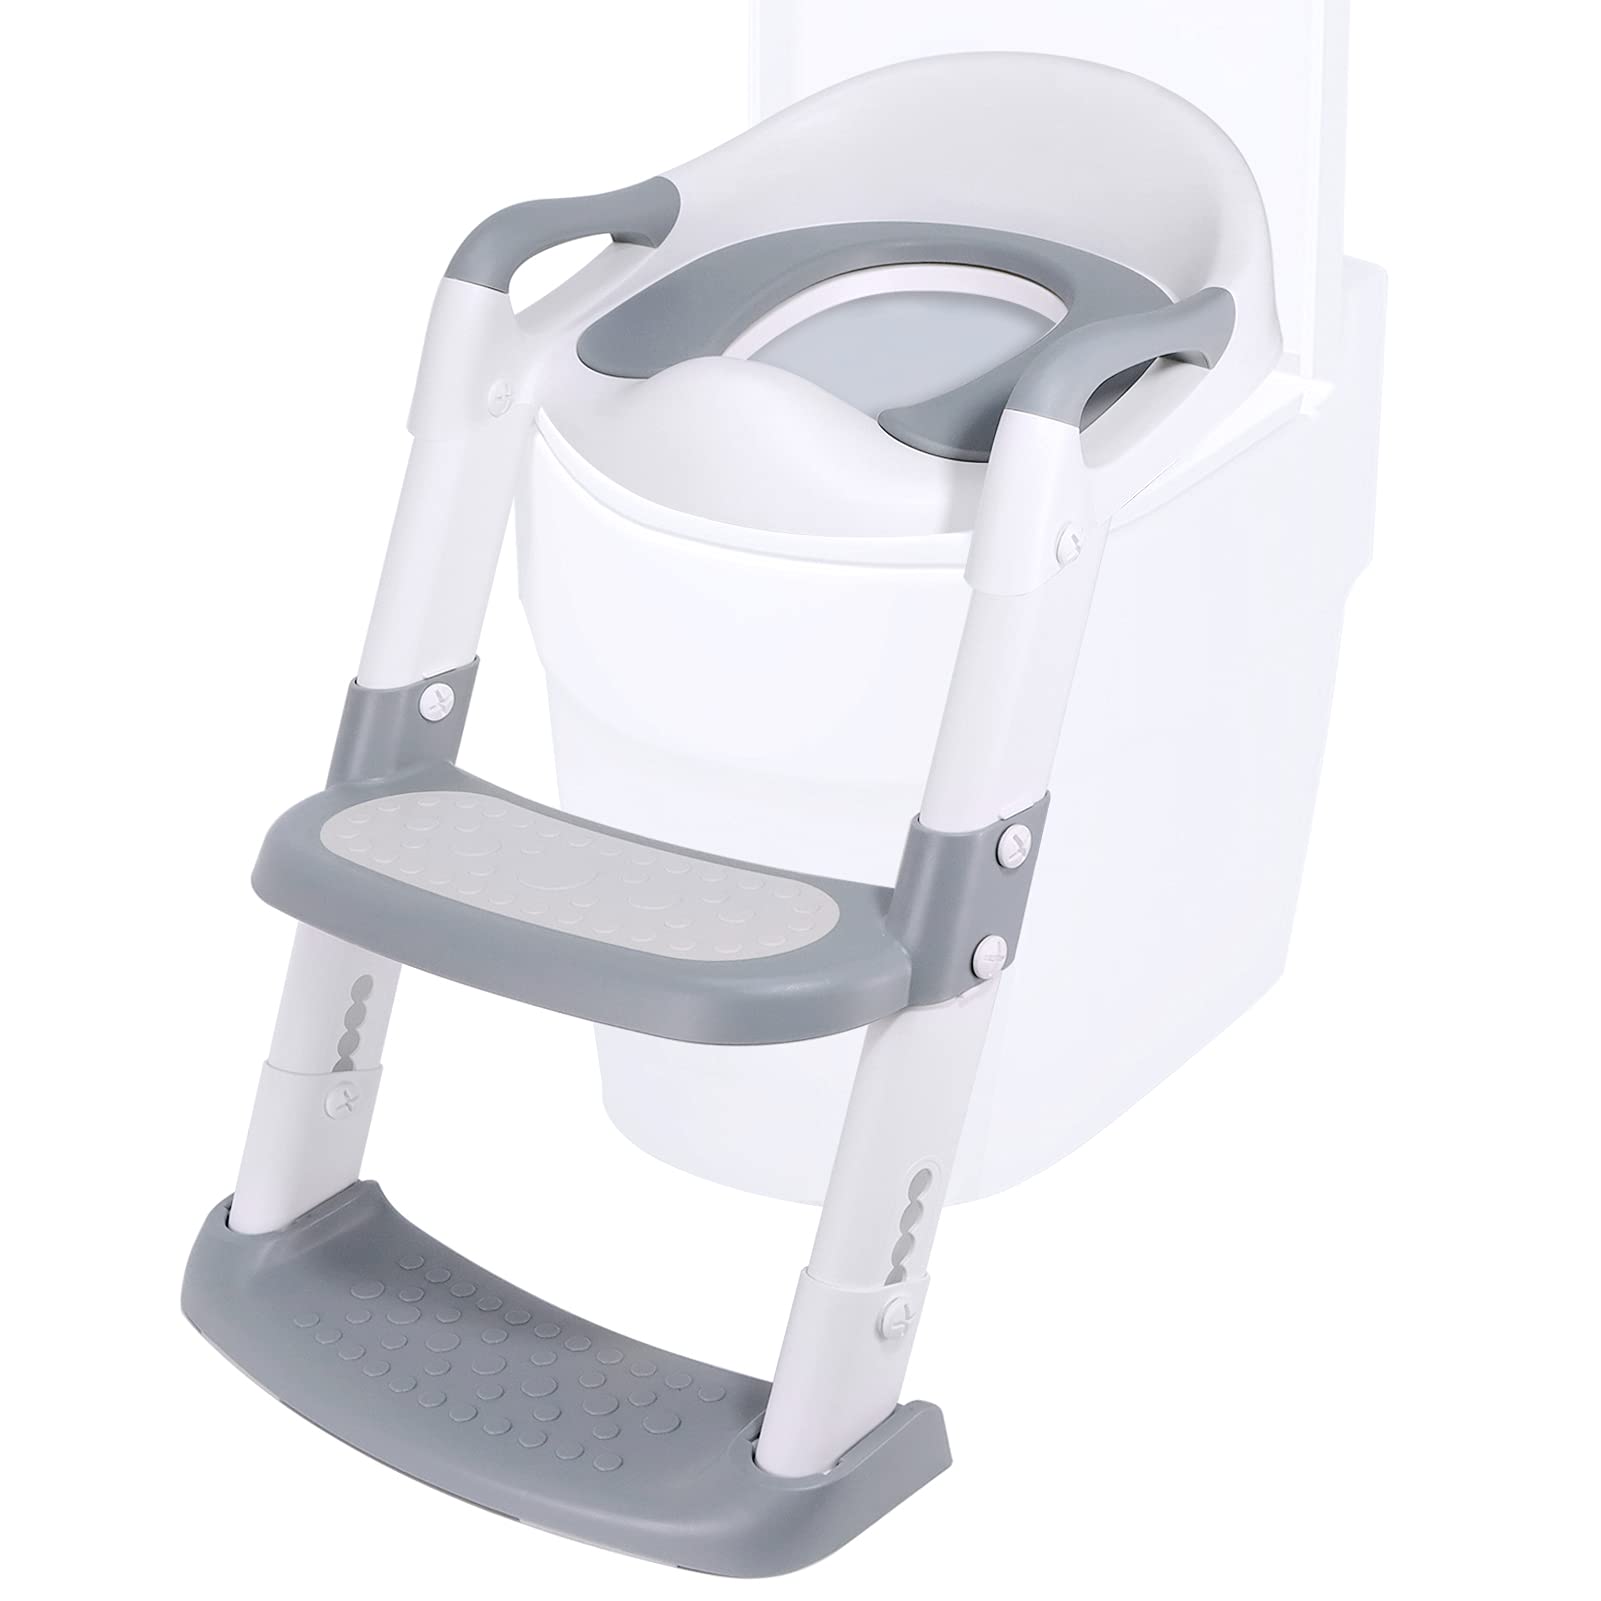 GeeBat Potty Training Seat with Ladder, 5 Levels Adjustable Potty Training Toilet with Step Stool Ladder & Soft PU Padded Seat for Kids Toddler Boy...